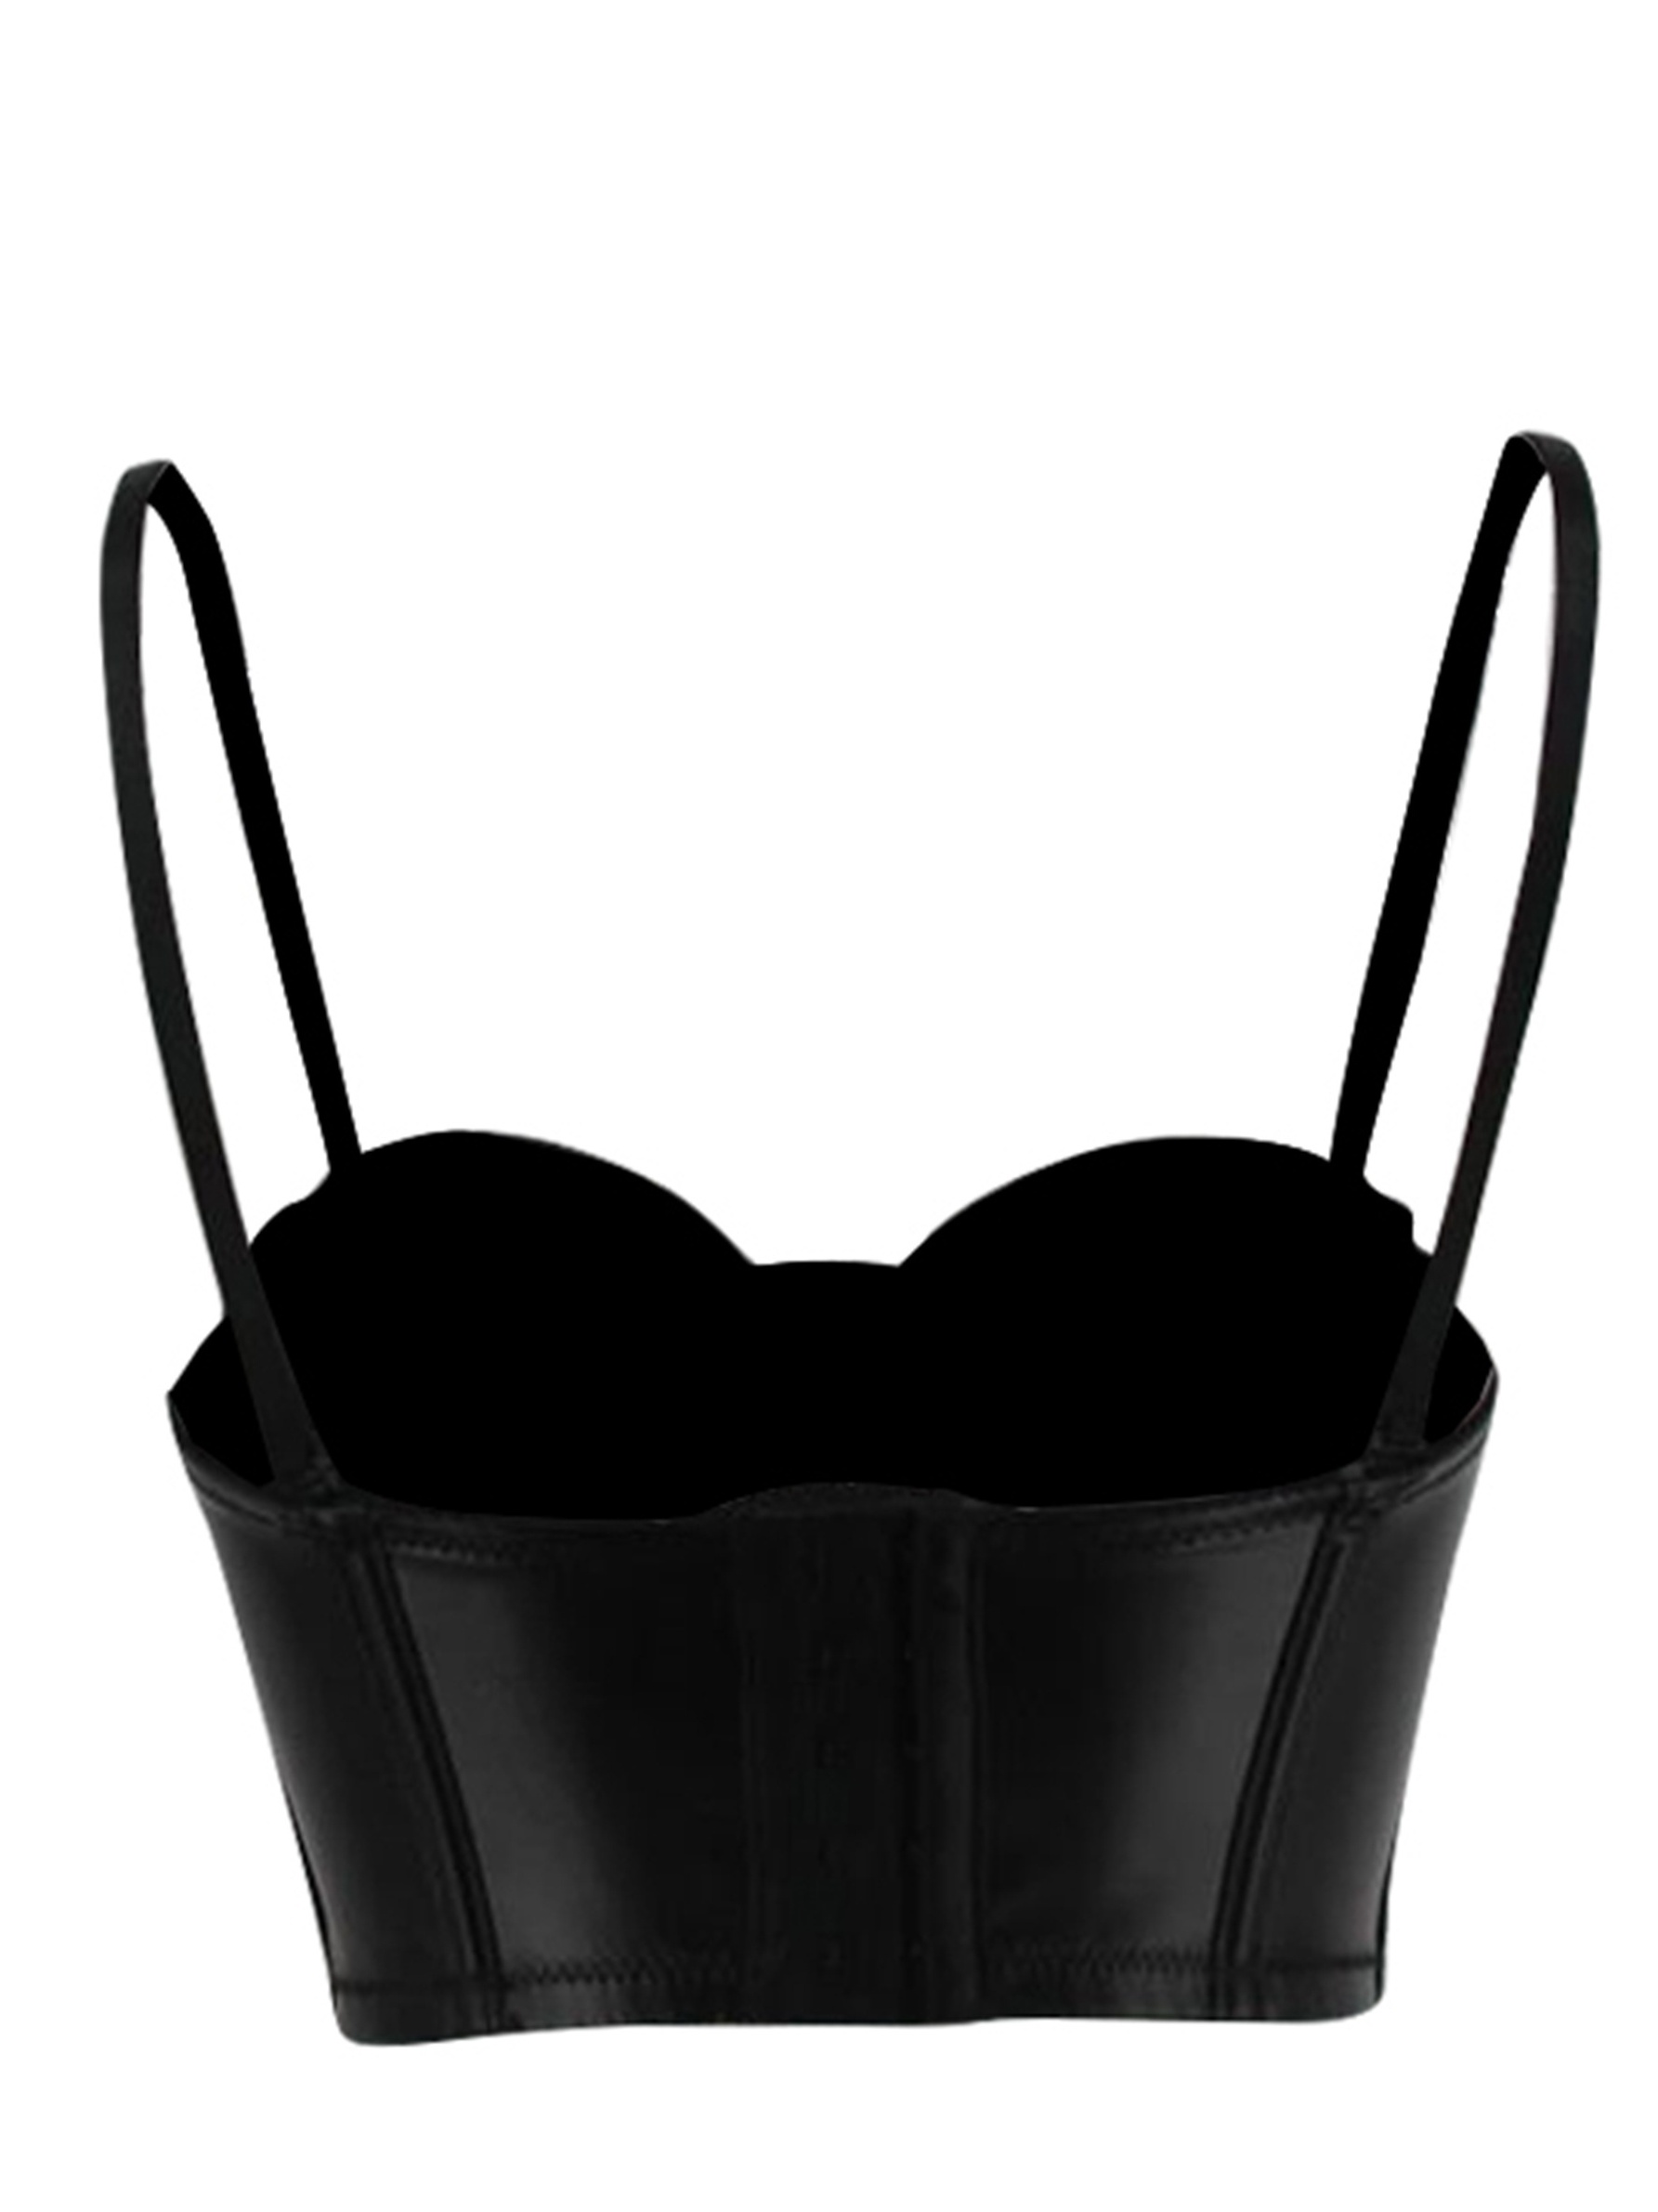 2023new Corset Black Pu Leather Bustier Crop Top Fashion Lady